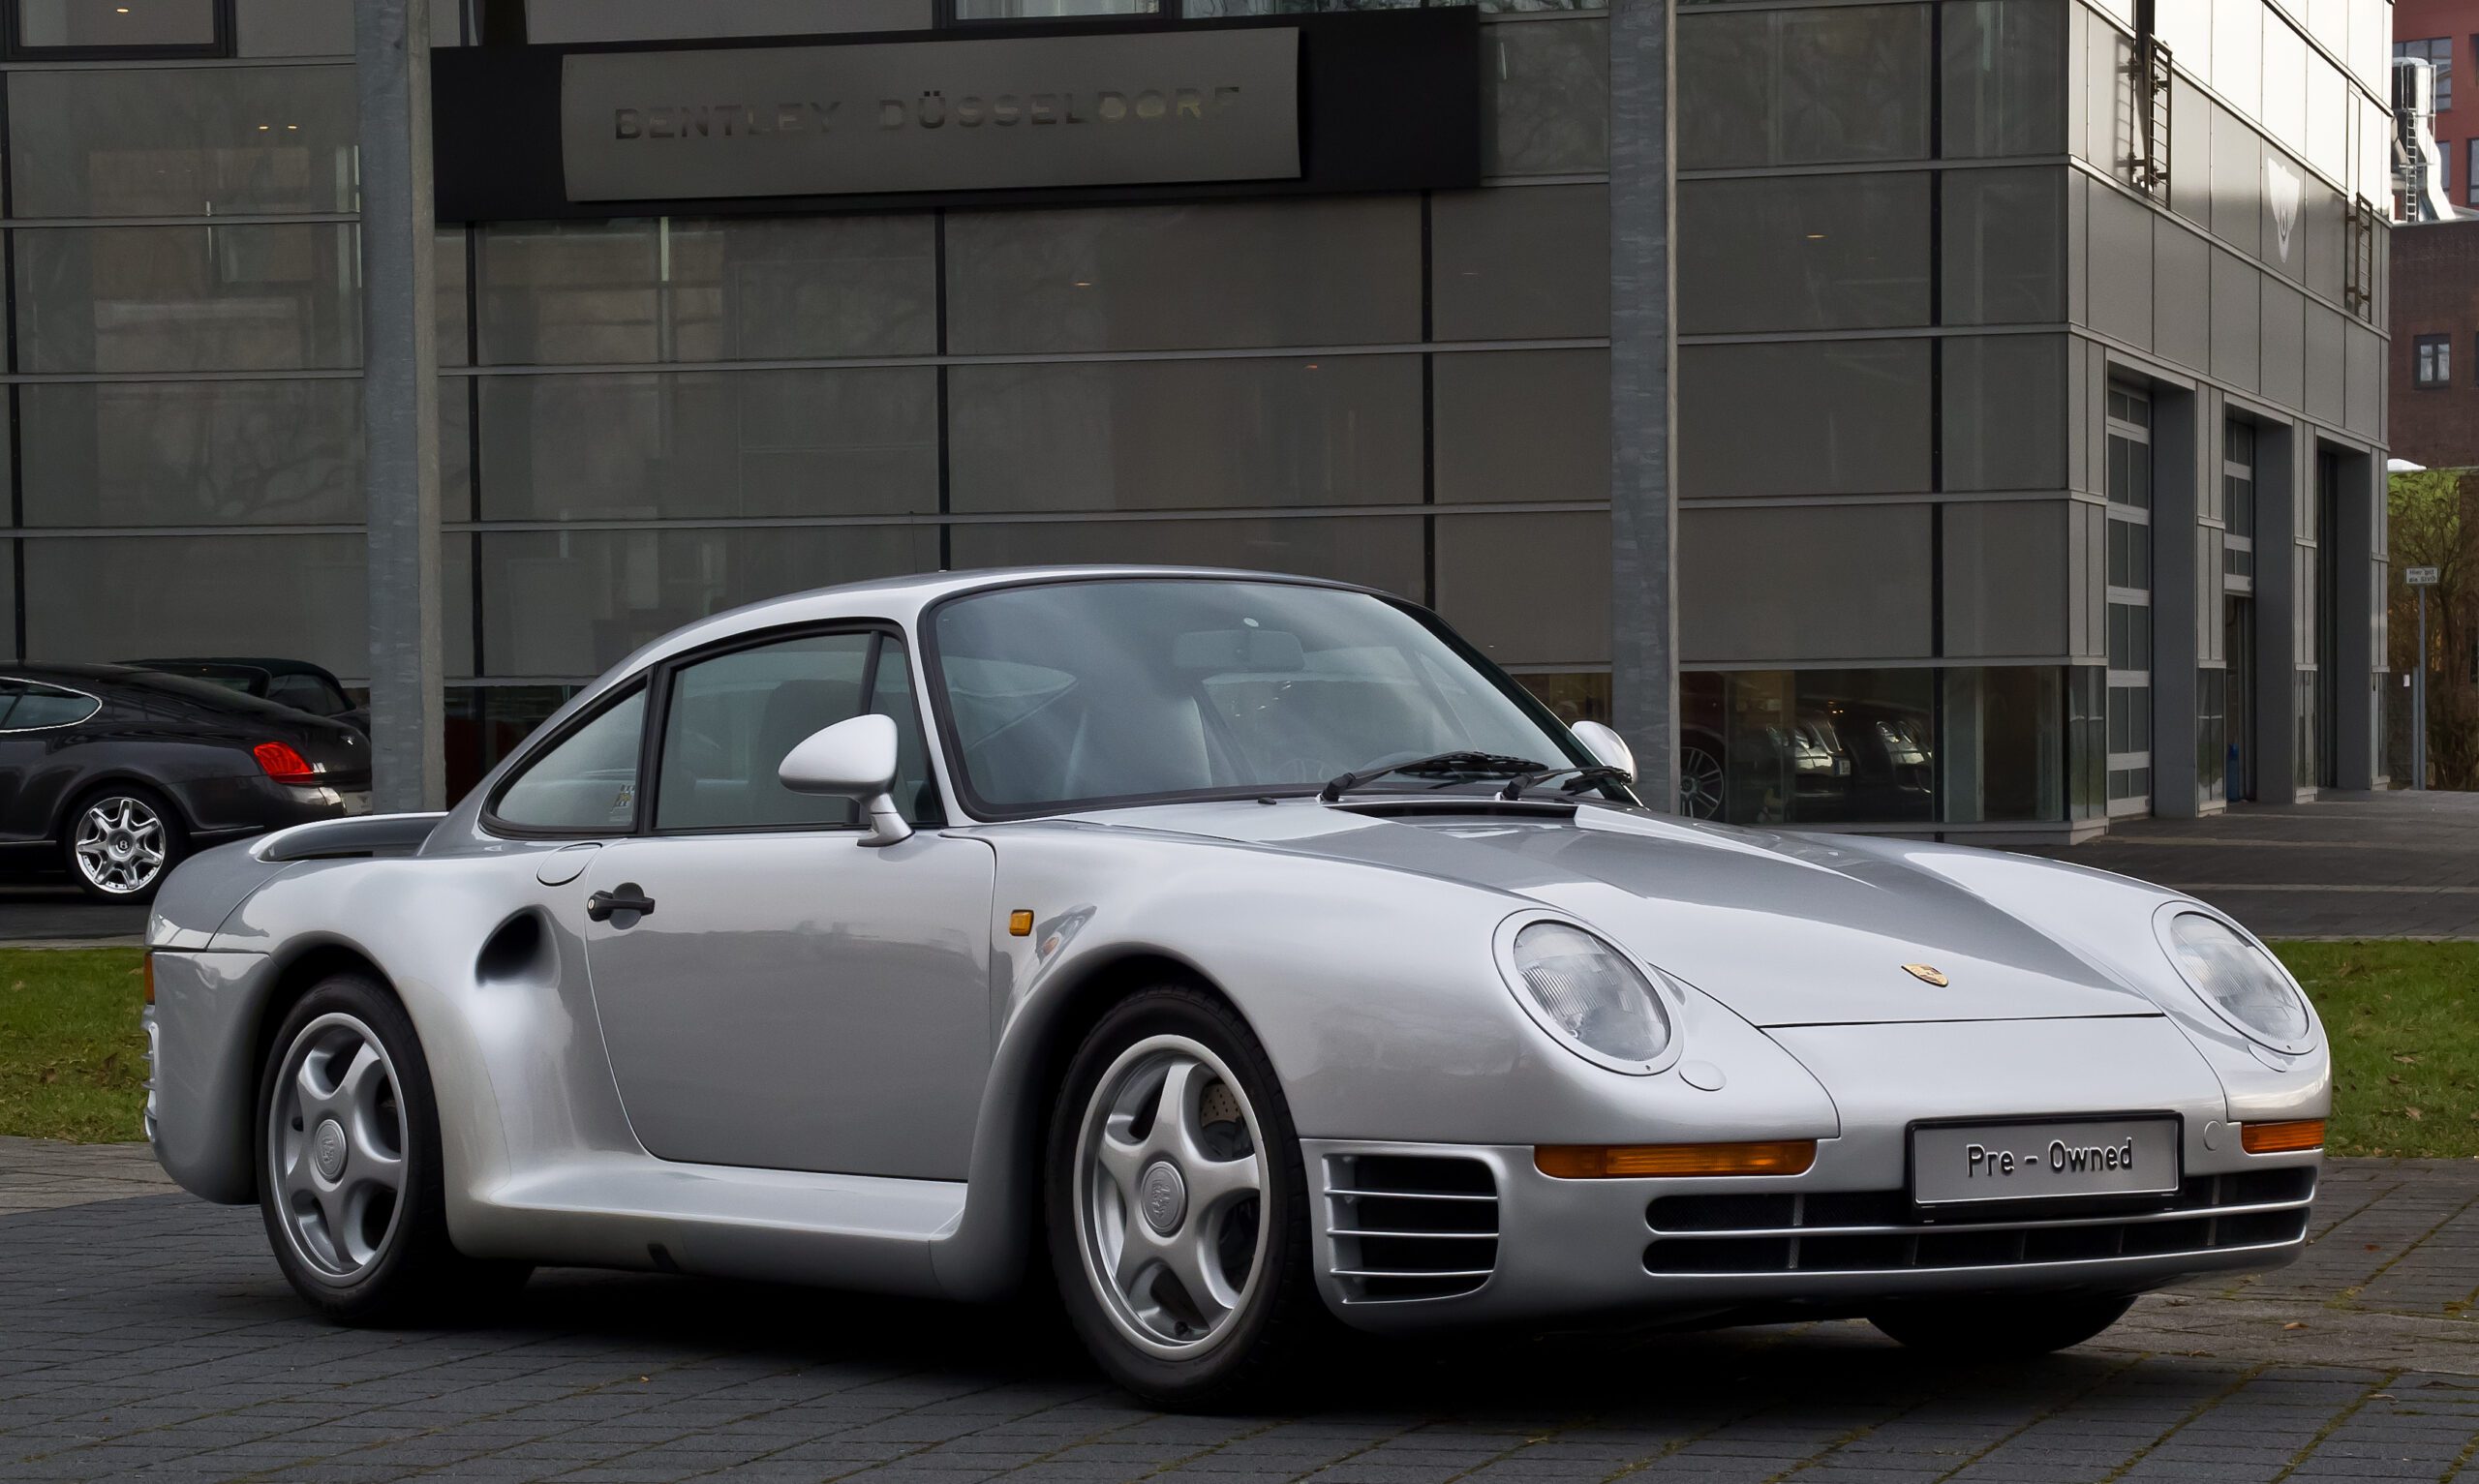 Porsche 959 used model from wikimedia commons